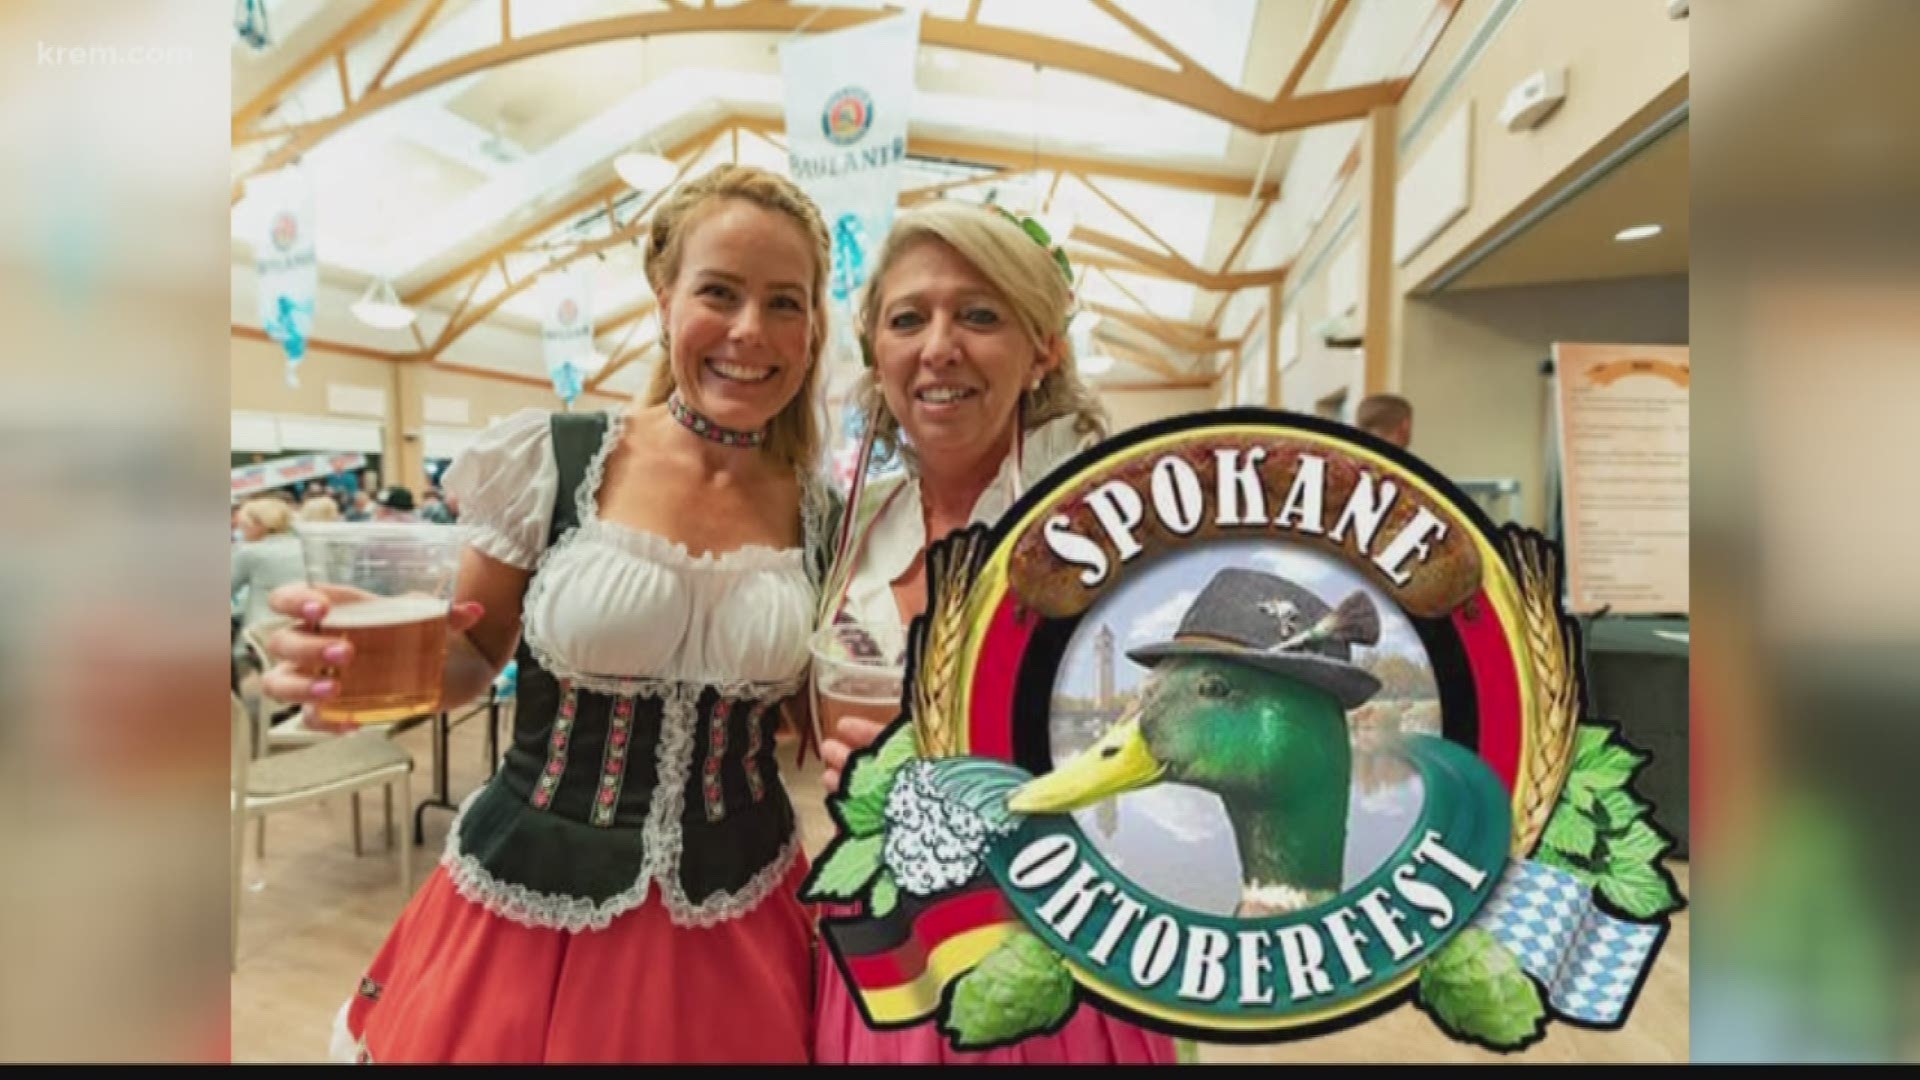 Learn about fun events going on around Spokane this fall.